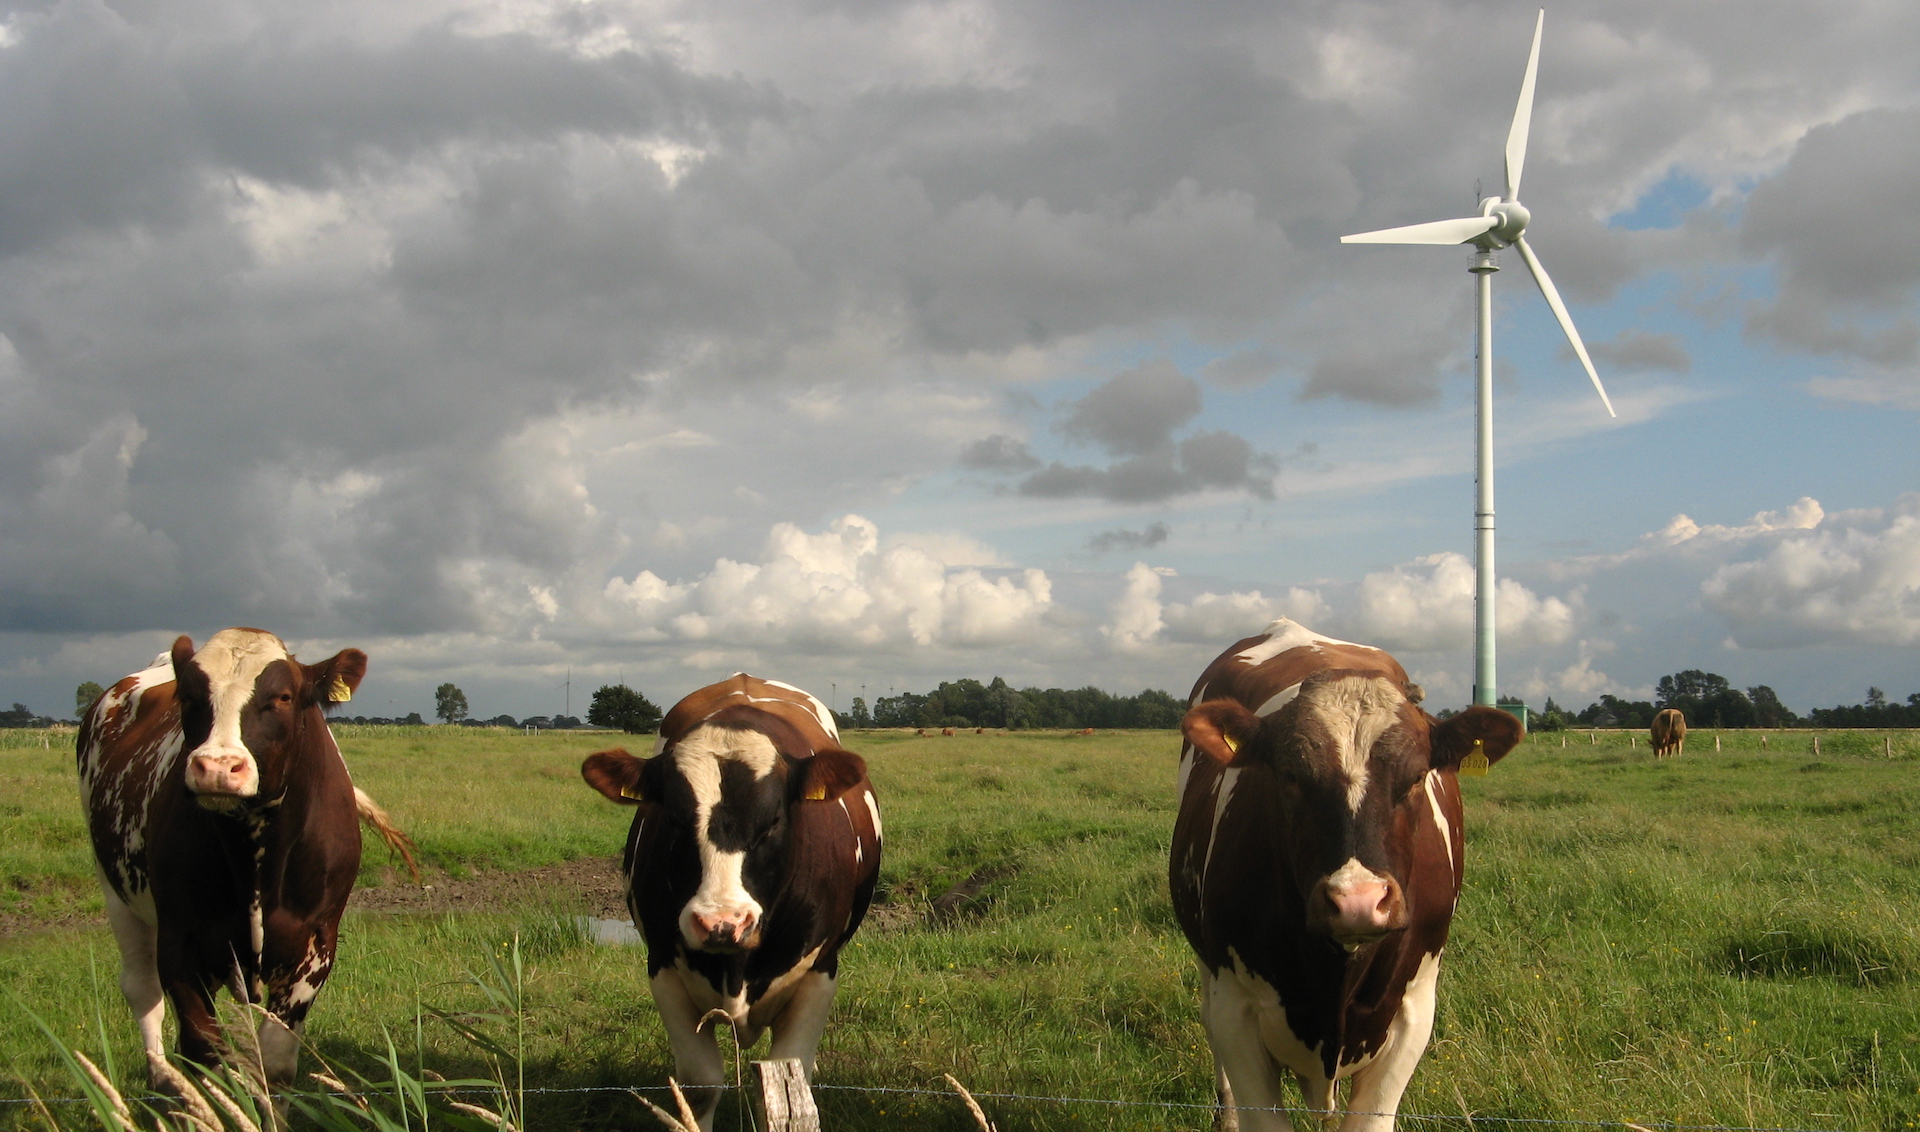 Three cows standing at a fence with a wind turbine in the background